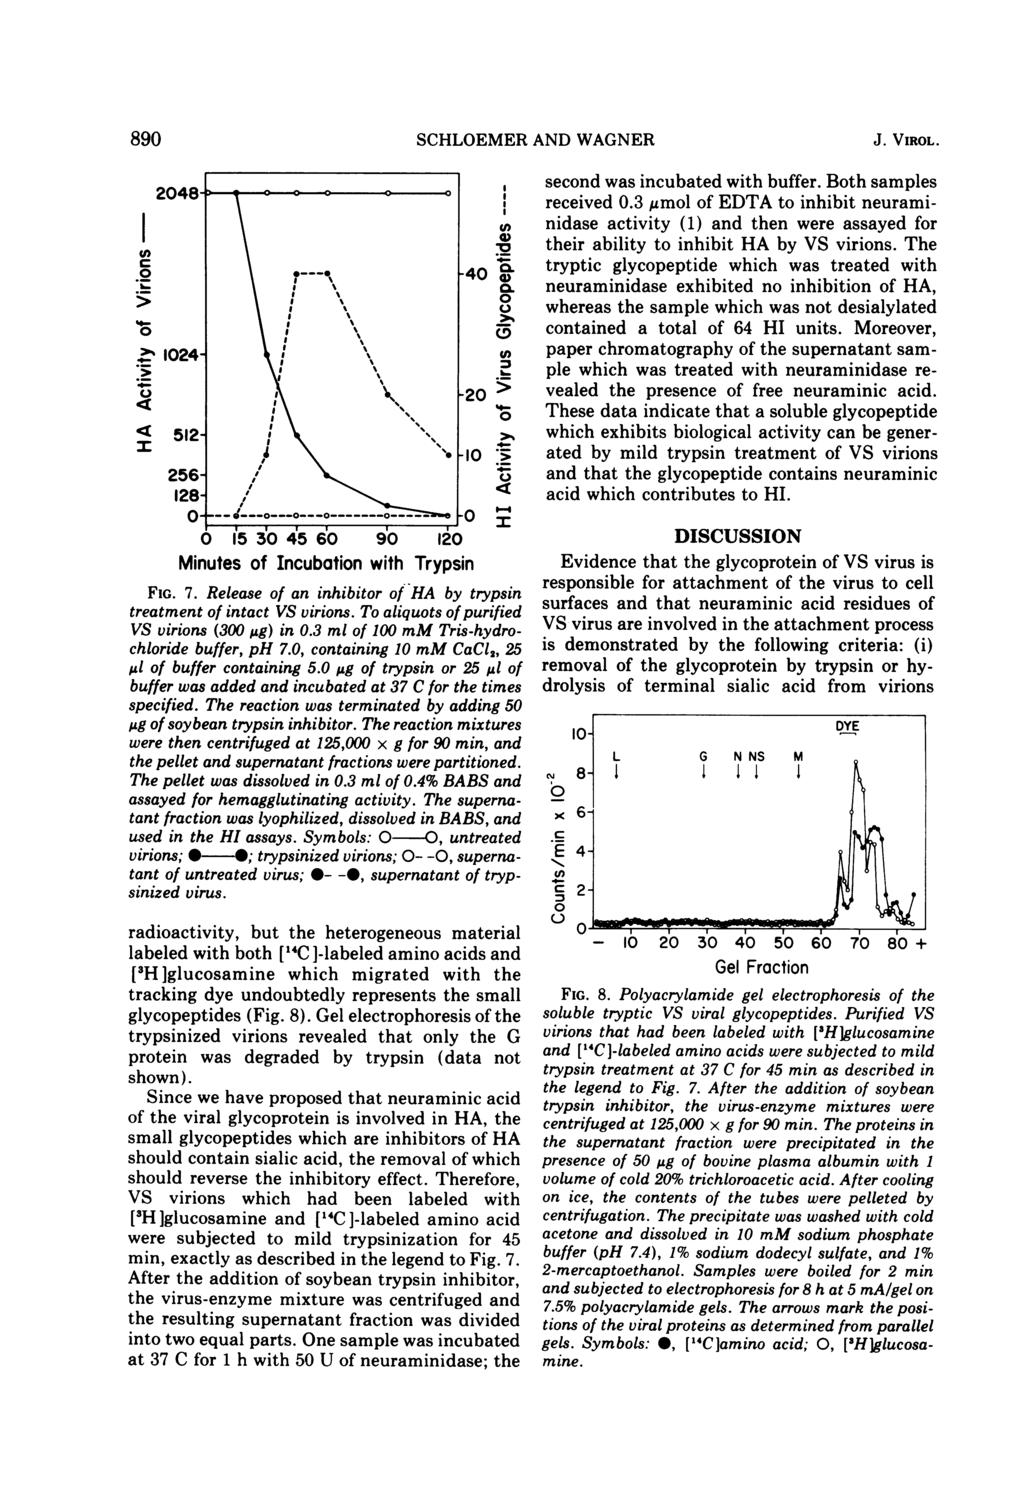 89 SCHLOEMER AND WAGNER J. VIROL. I c._ %I- - I (I a) ) 'o. Minutes of Incubation with Trypsin FIG. 7. Release of an inhibitor of HA by trypsin treatment of intact VS virions.